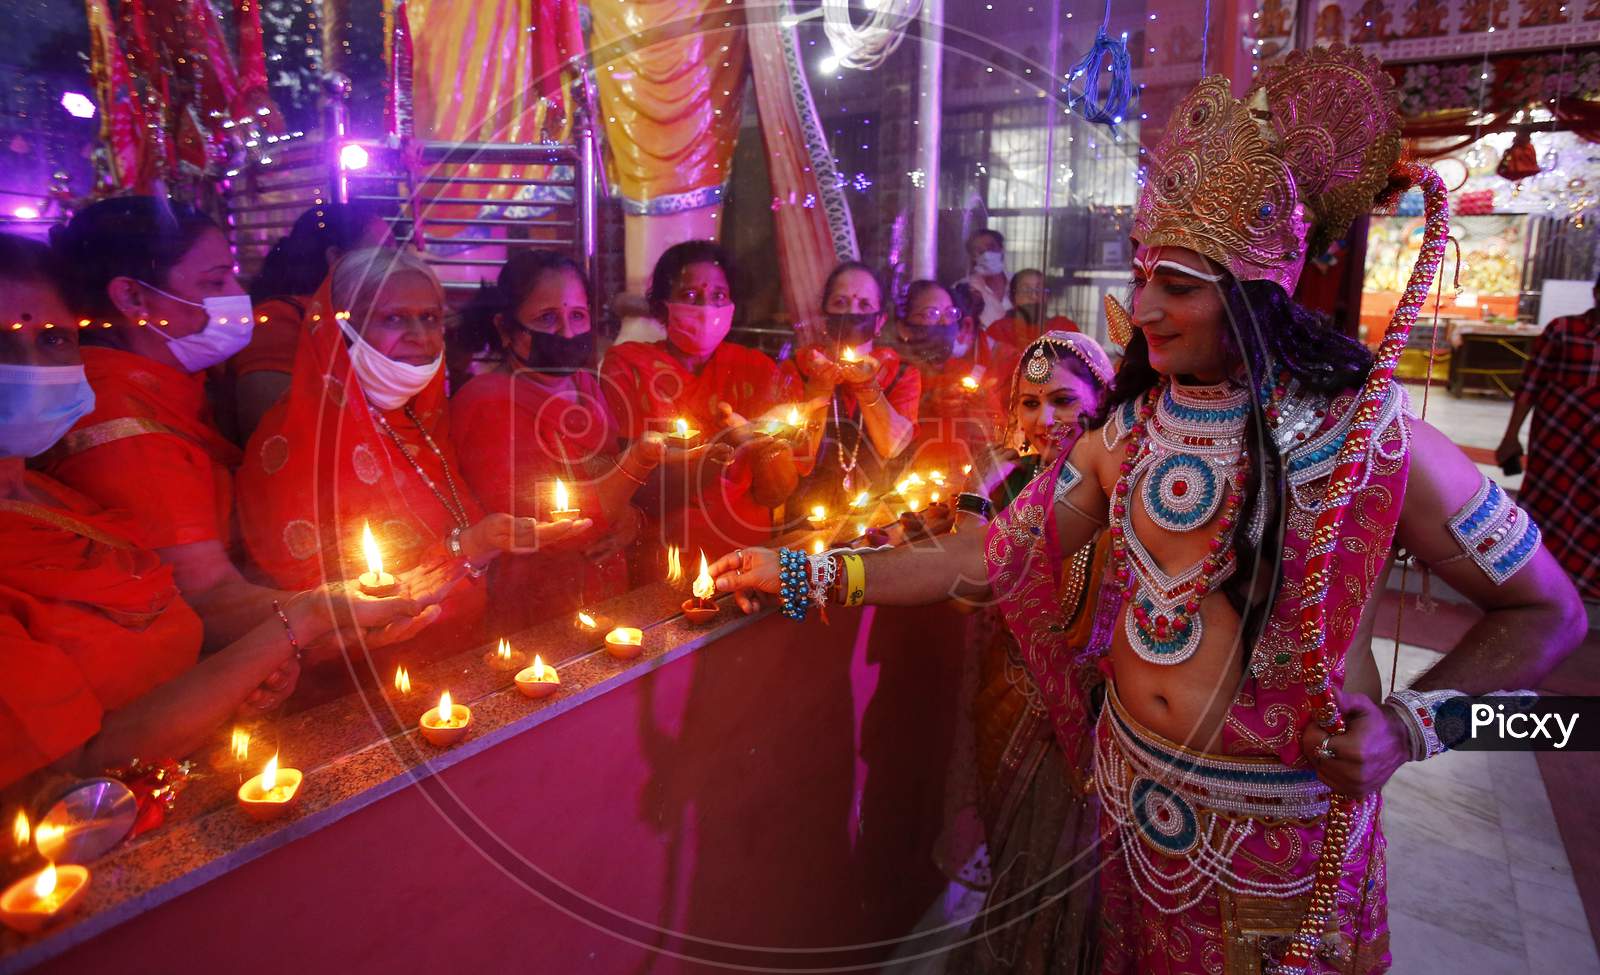 Devotees dressed up as Lord Rama and Goddess Sita light earthen lamps at a temple during the celebrations of the stone laying  ceremony of the Ram Temple by Prime Minister Narendra Modi in Ayodhya, in Chandigarh August 5, 2020